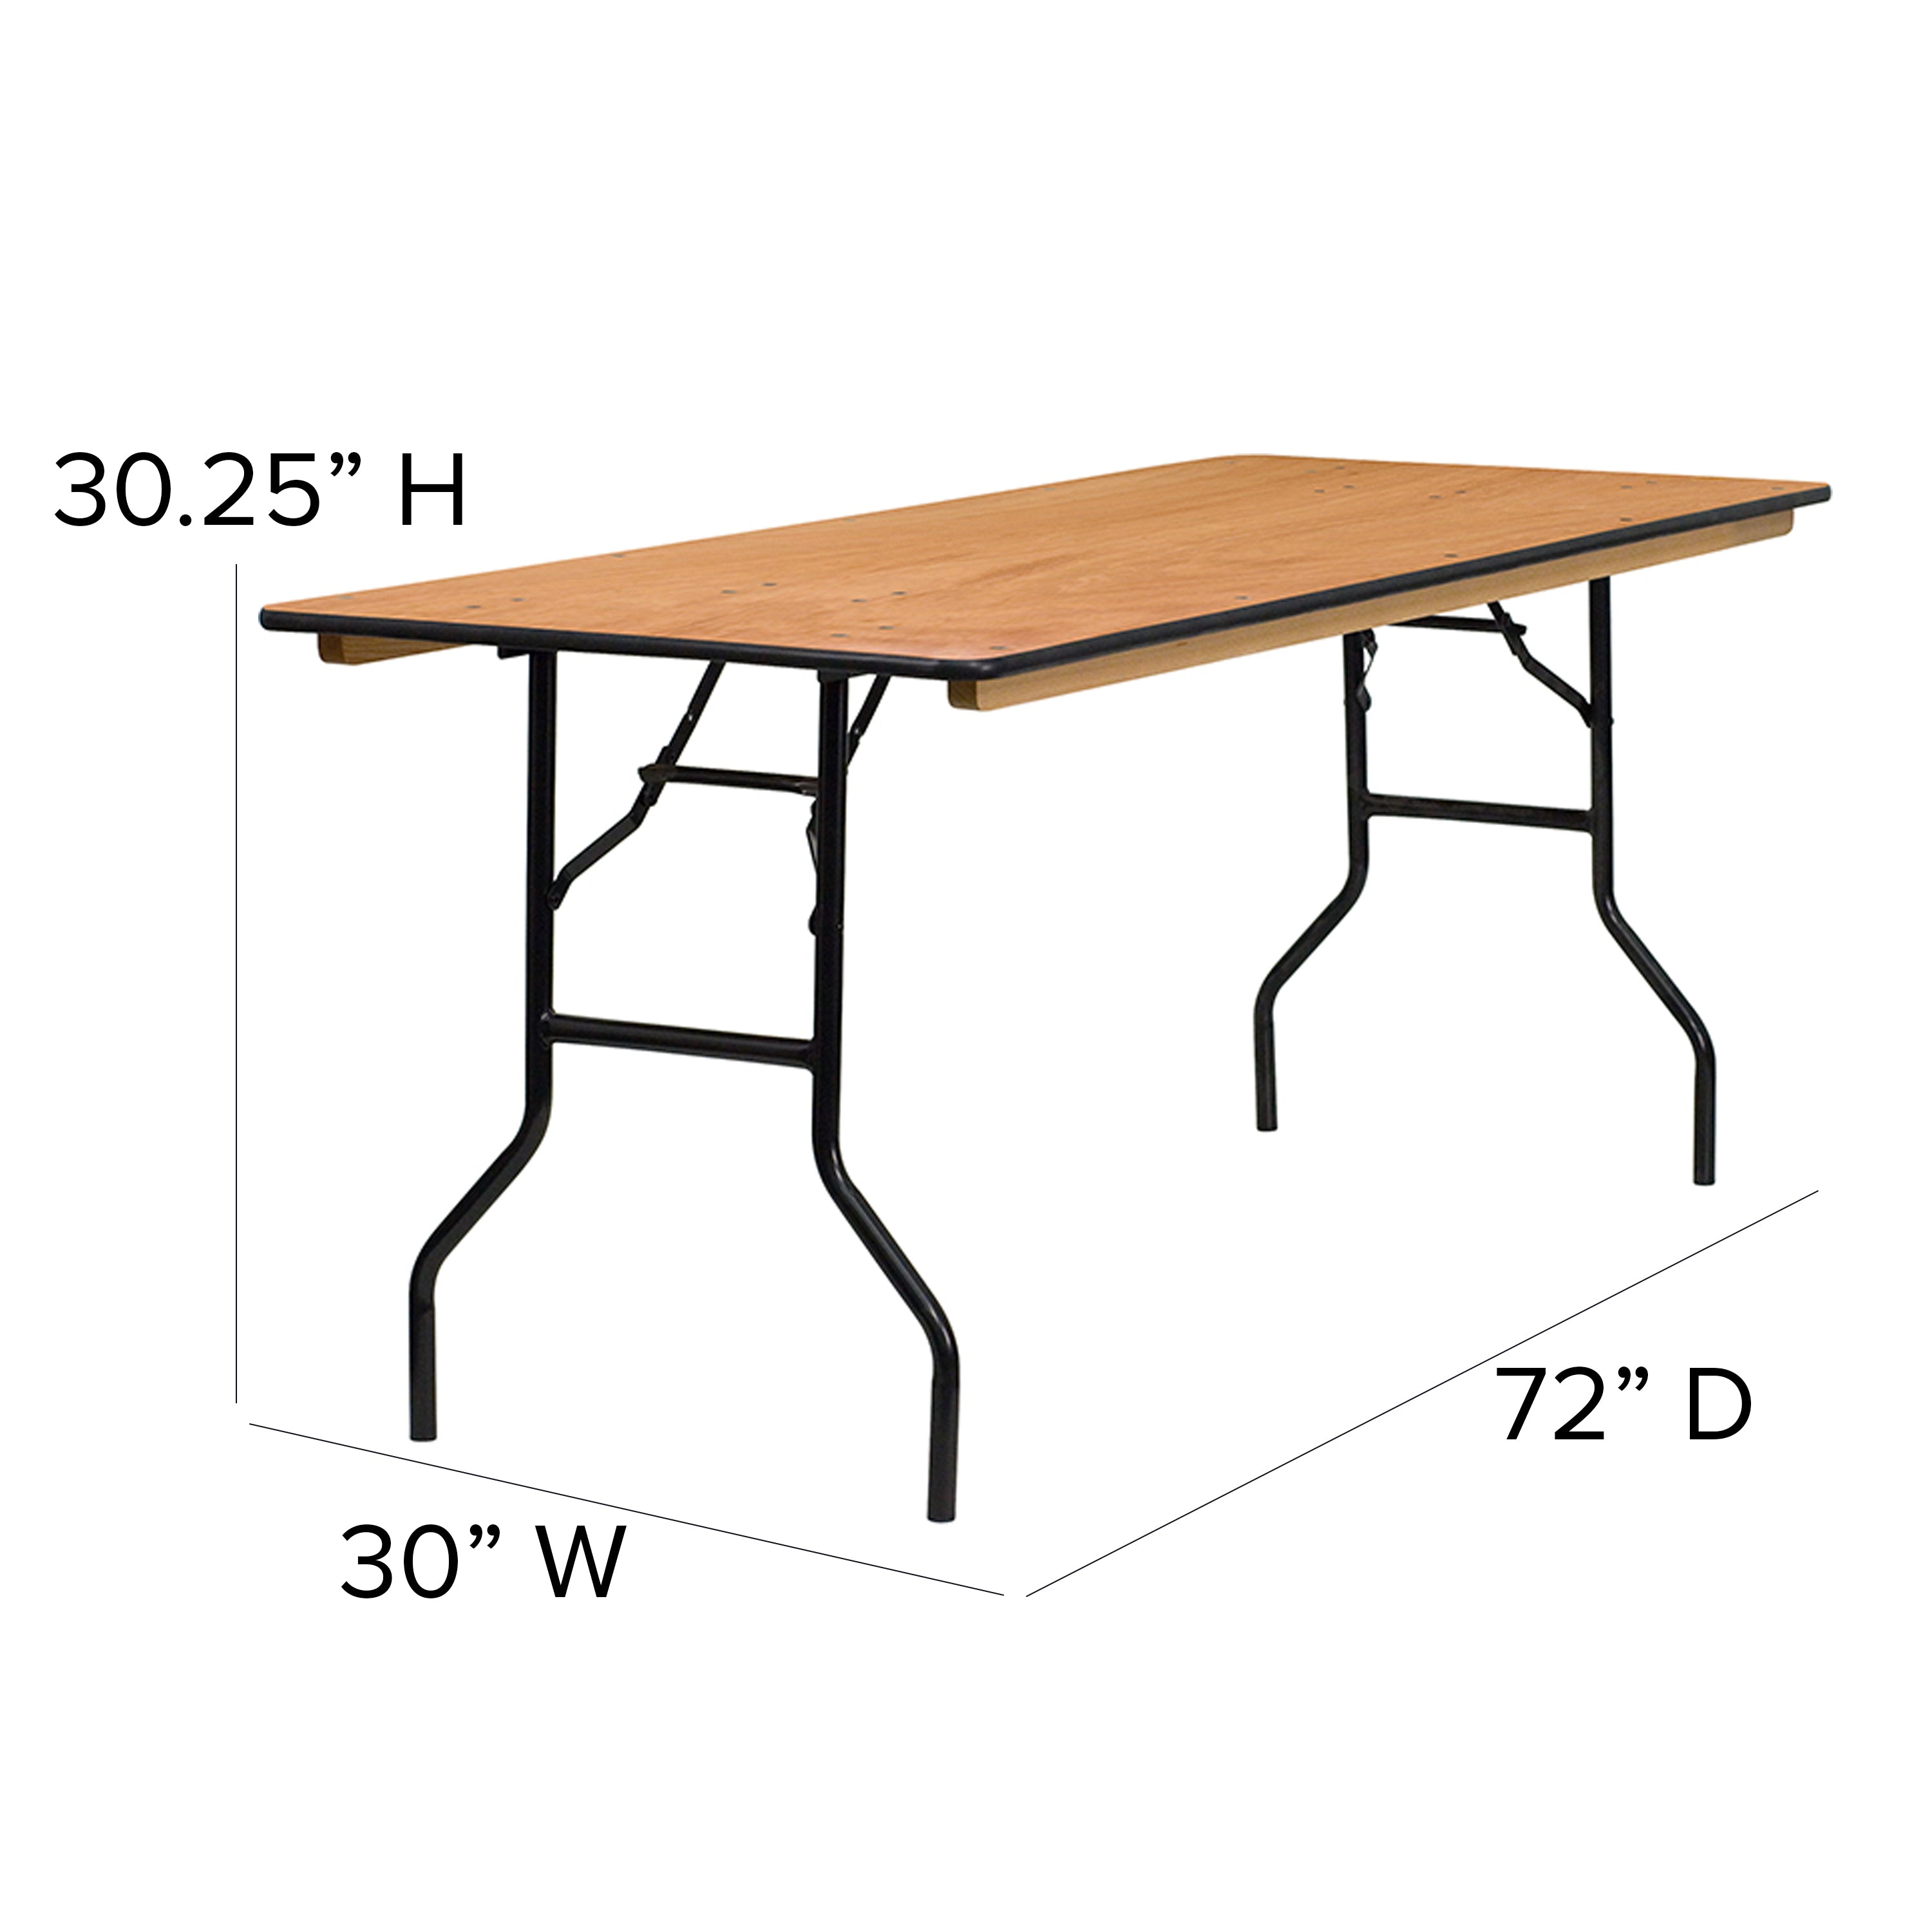 6-Foot Rectangular Wood Folding Banquet Table with Clear Coated Finished Top-Rectangular Folding Table-Flash Furniture-Wall2Wall Furnishings